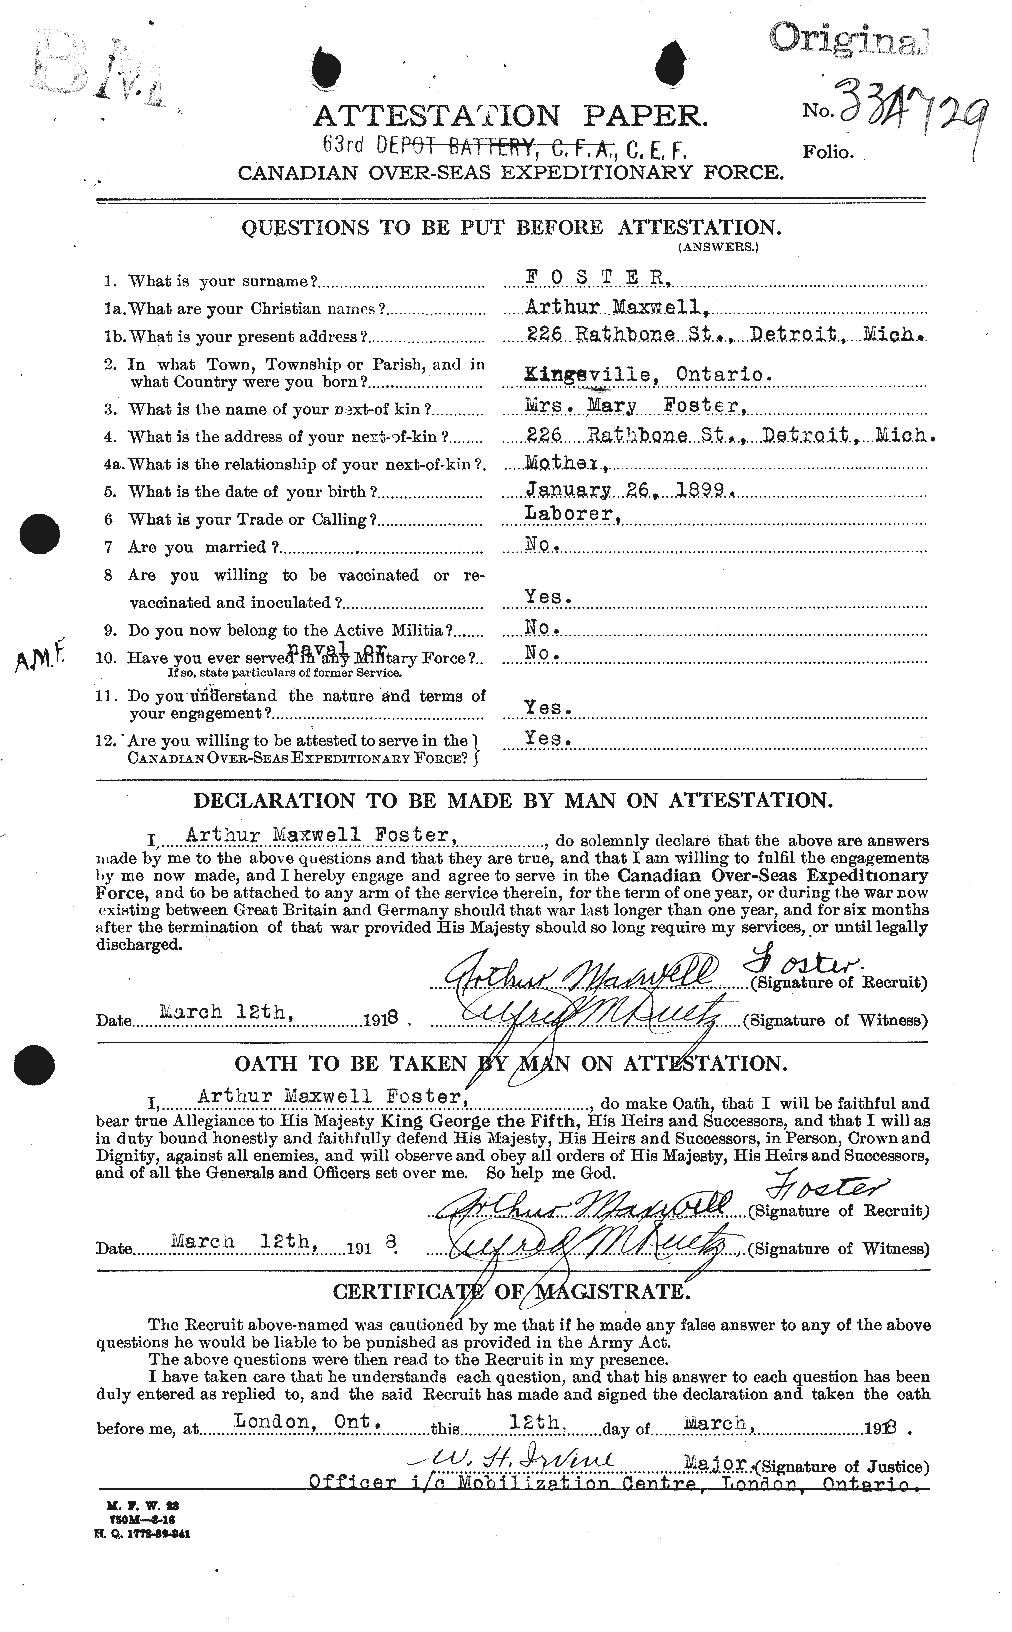 Personnel Records of the First World War - CEF 330477a